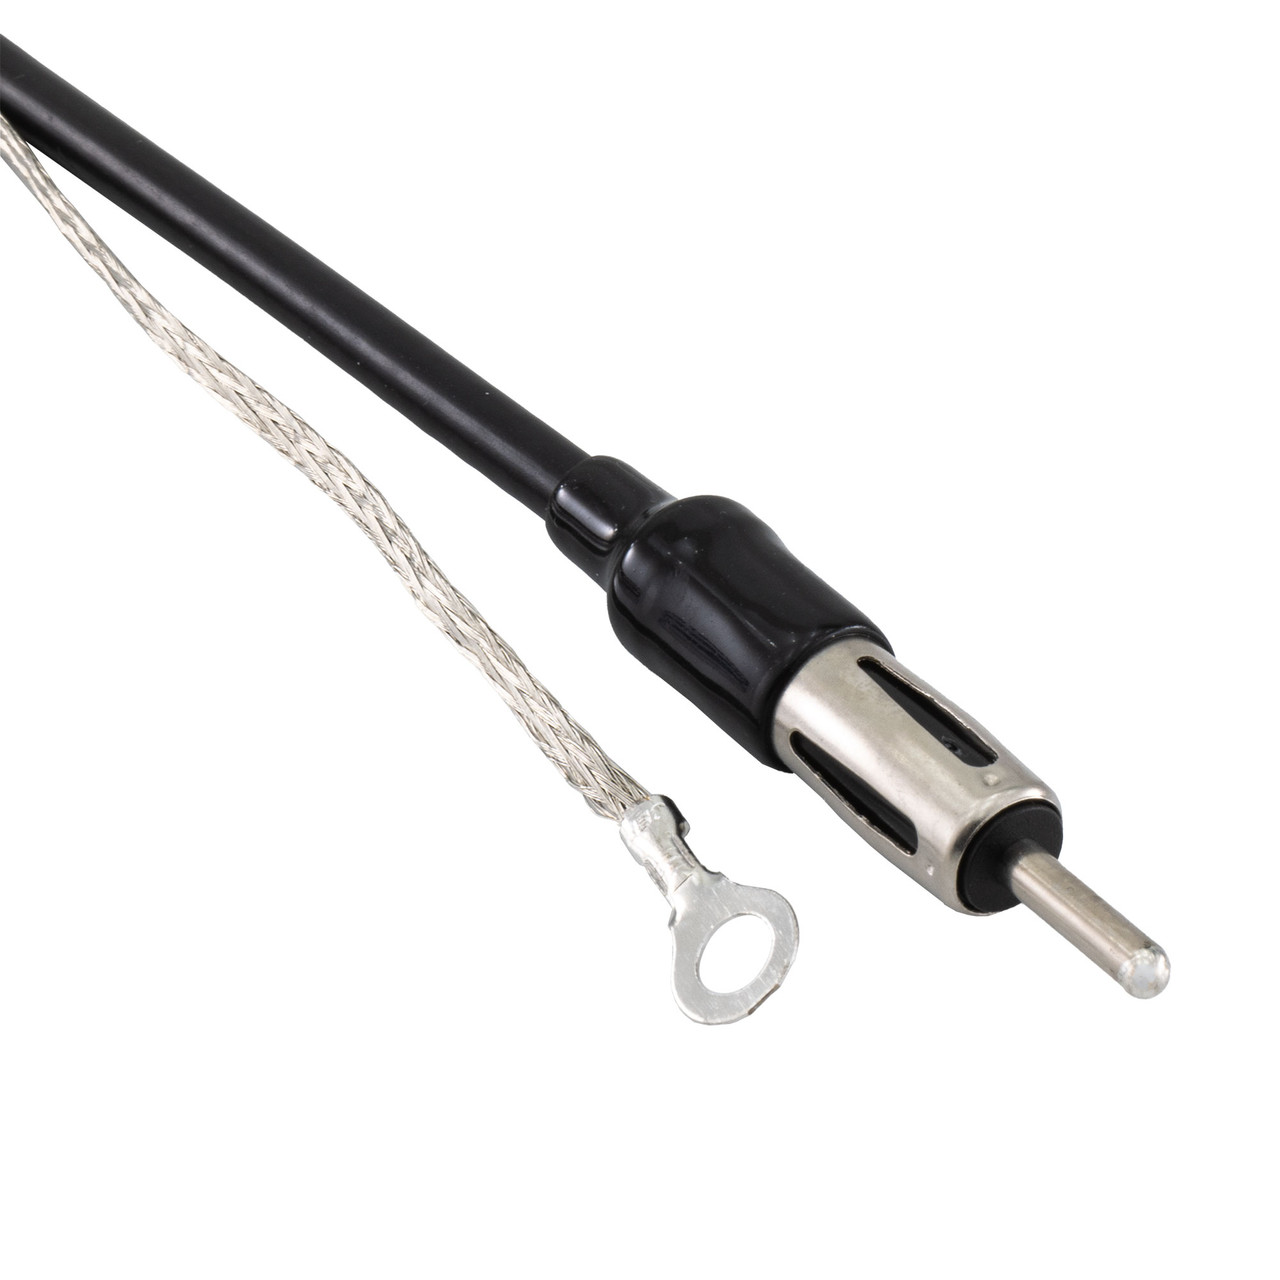 https://cdn11.bigcommerce.com/s-kwuh809851/images/stencil/1280x1280/products/3013/28183/RP-2191-B-Antenna-Cords__47310.1652206526.jpg?c=2?imbypass=on